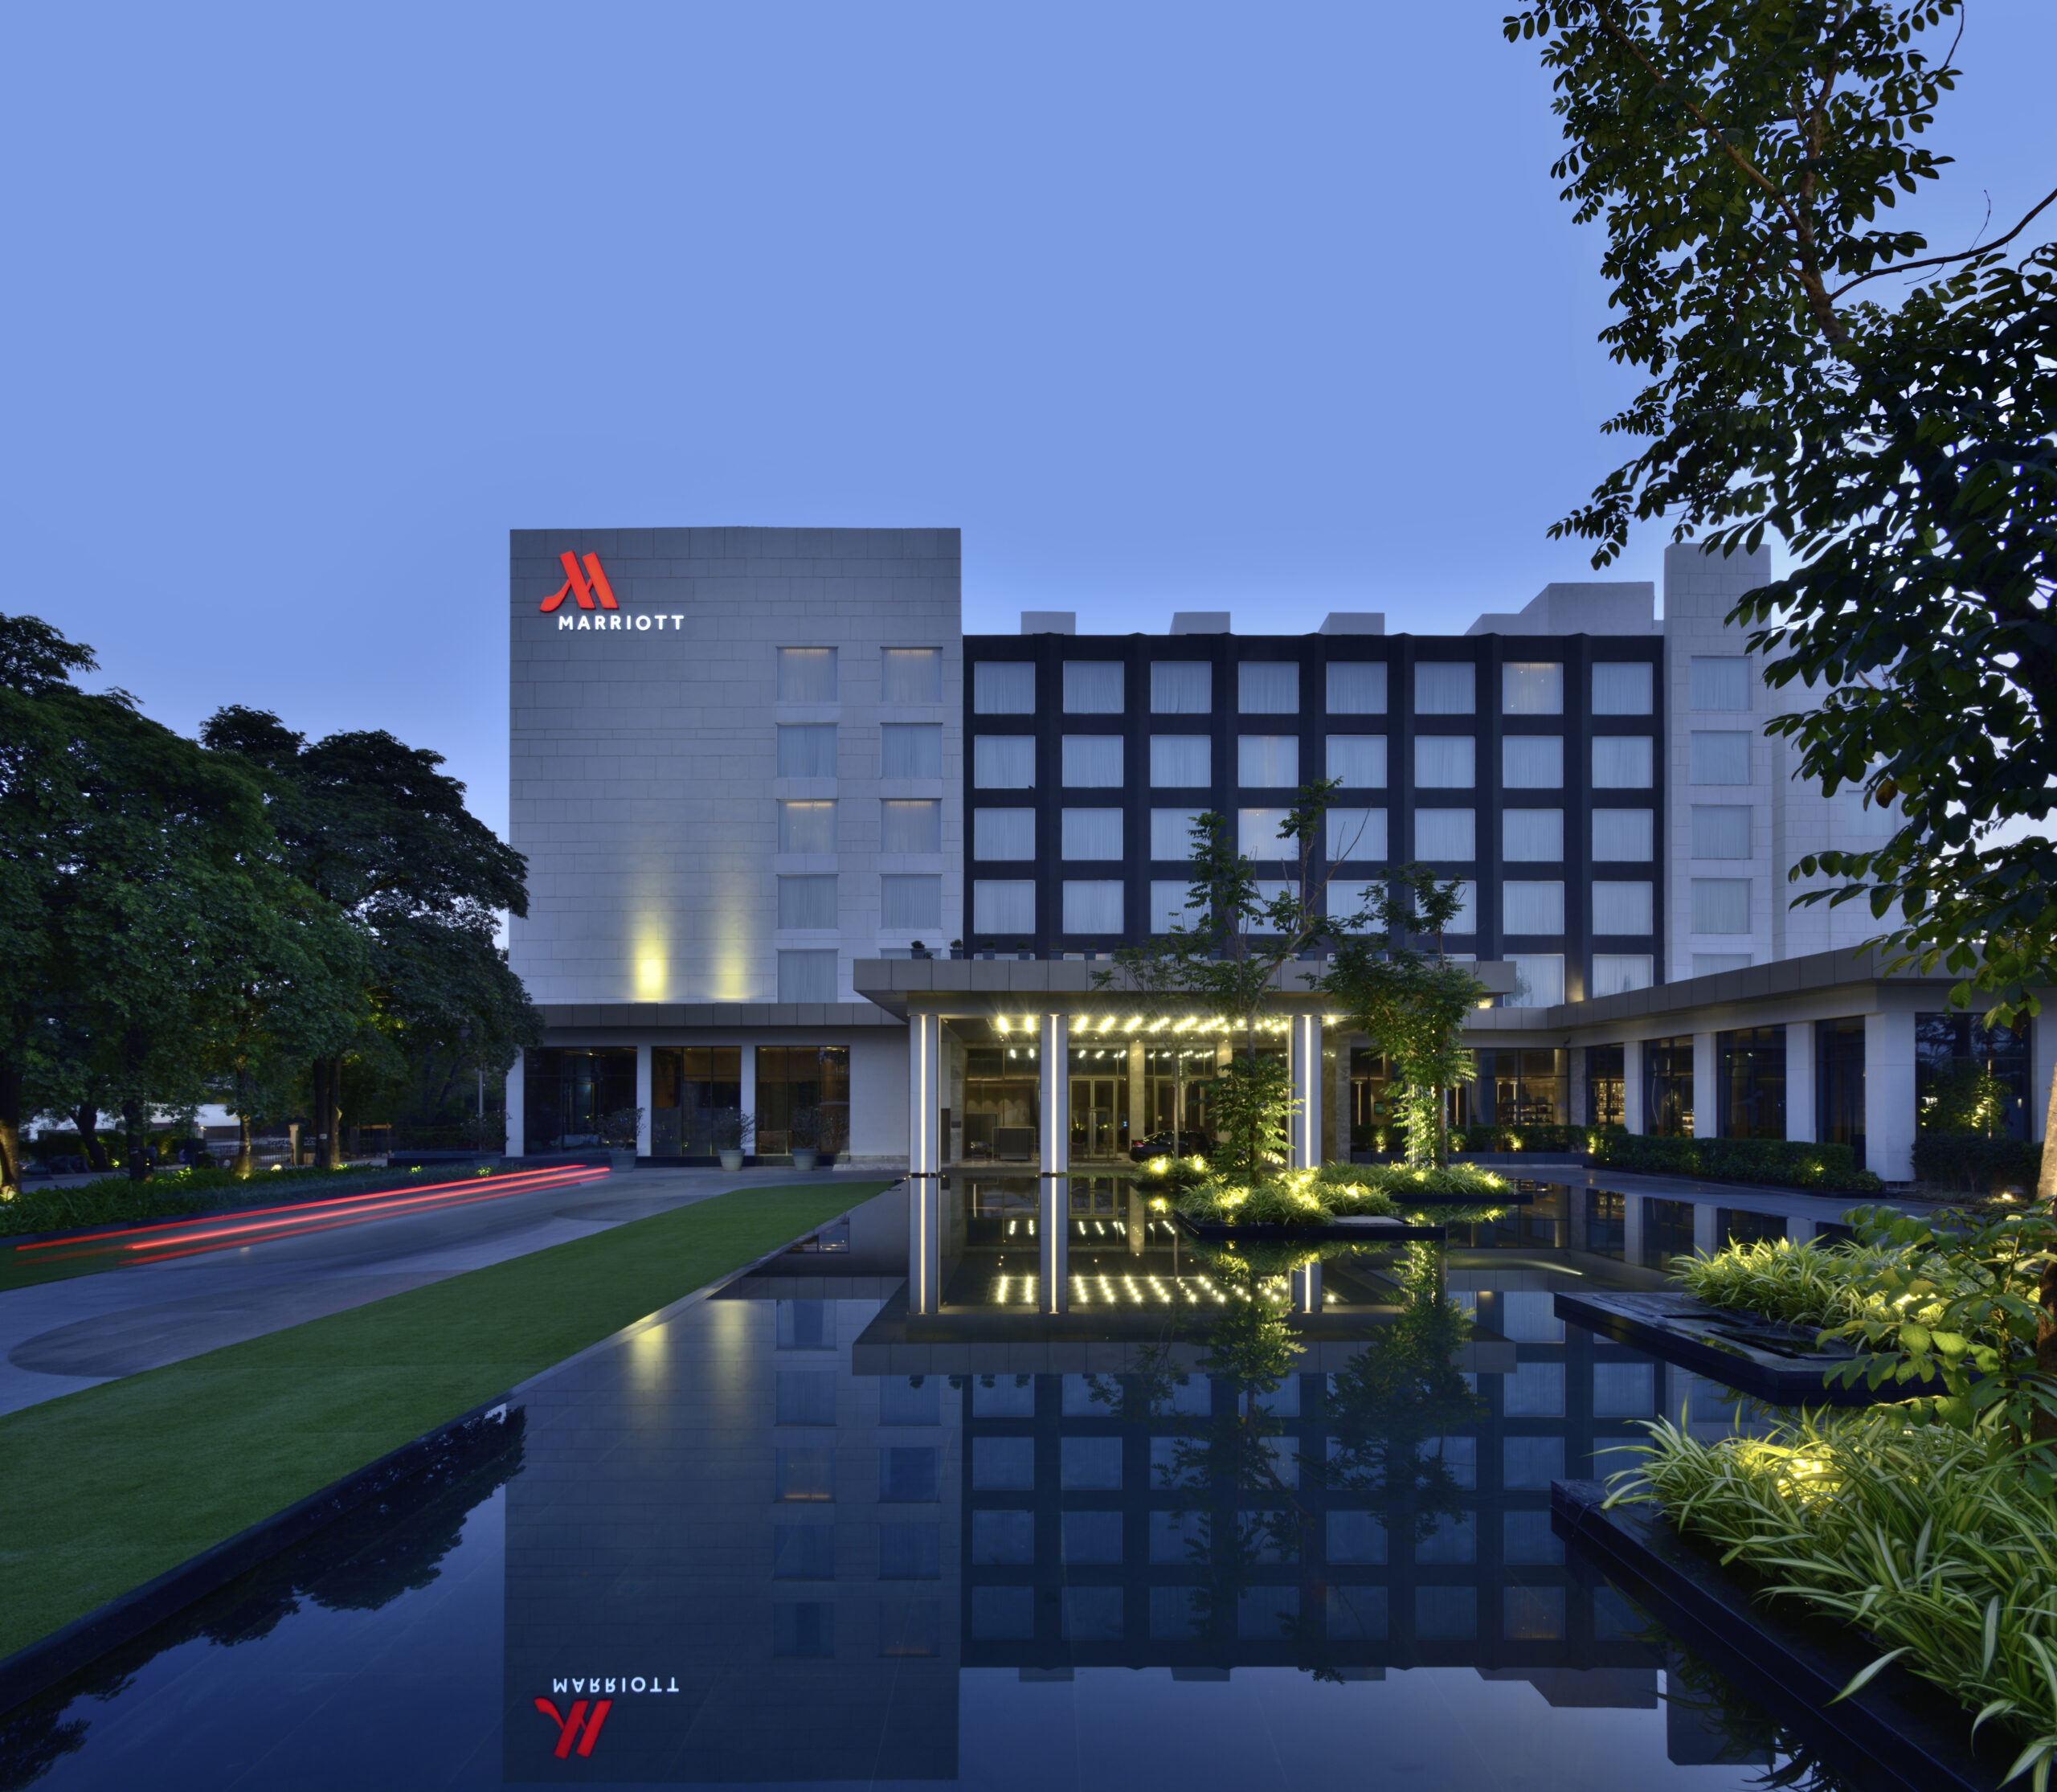 Marriott to expand India portfolio to 250 hotels by 2025